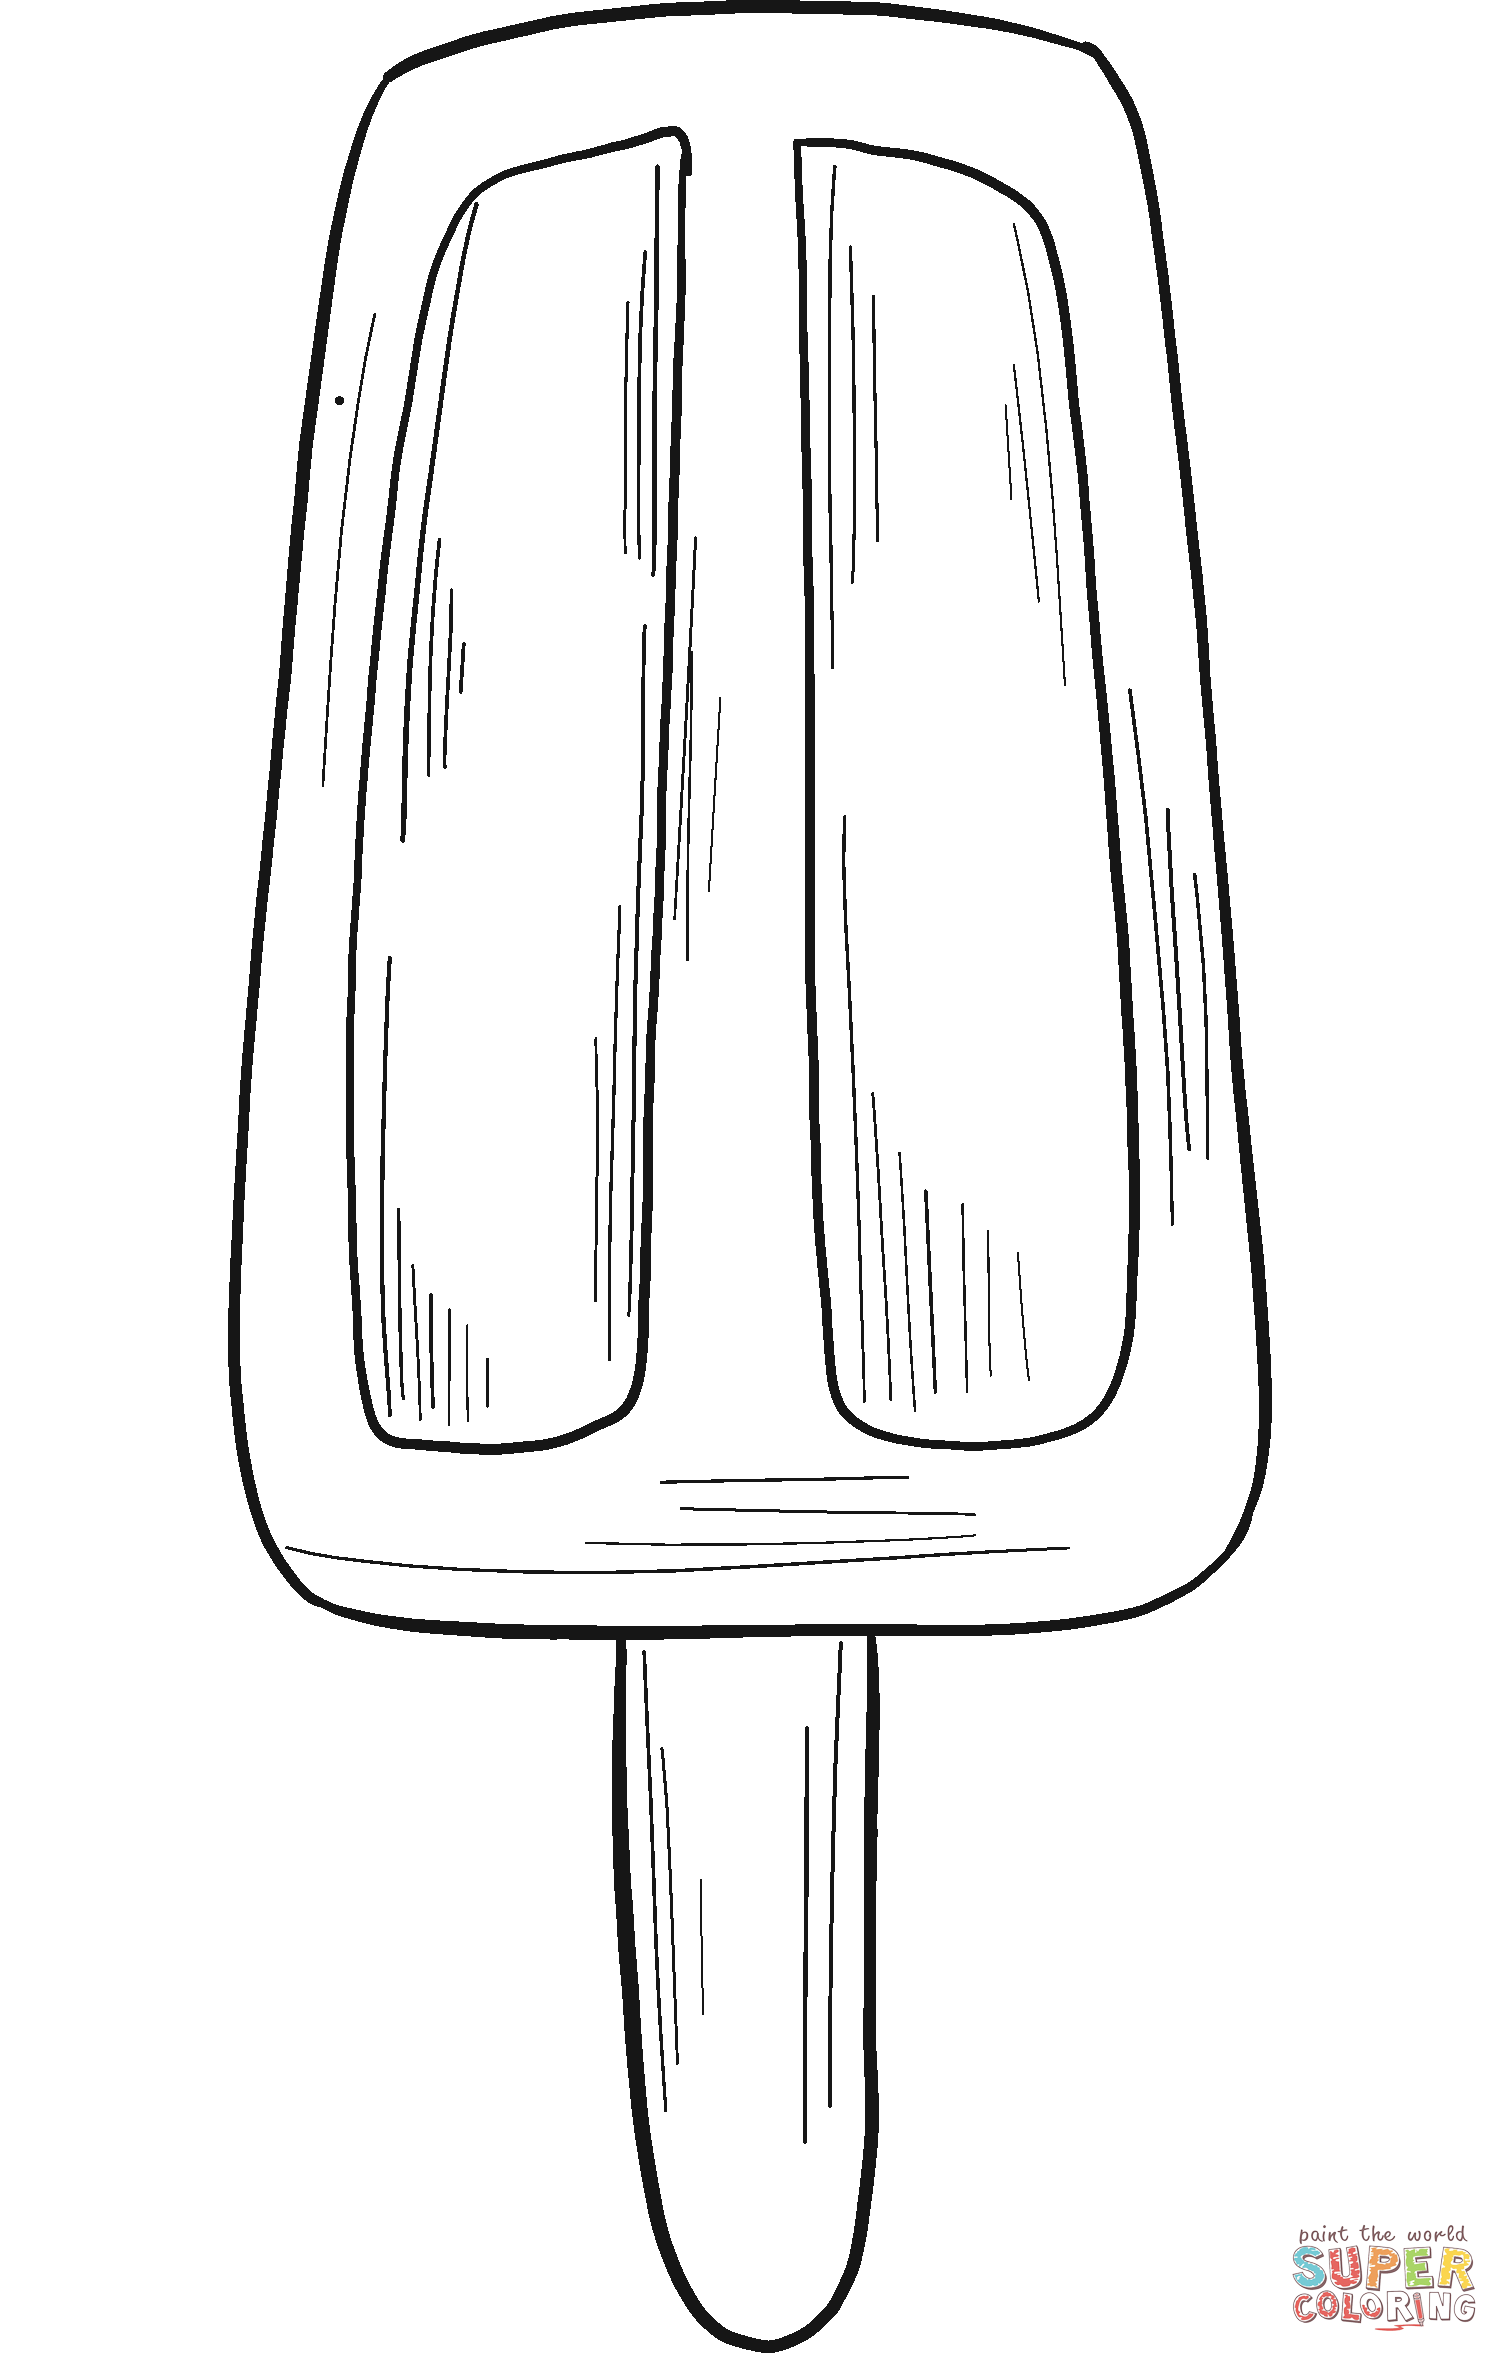 Popsicle coloring page free printable coloring pages